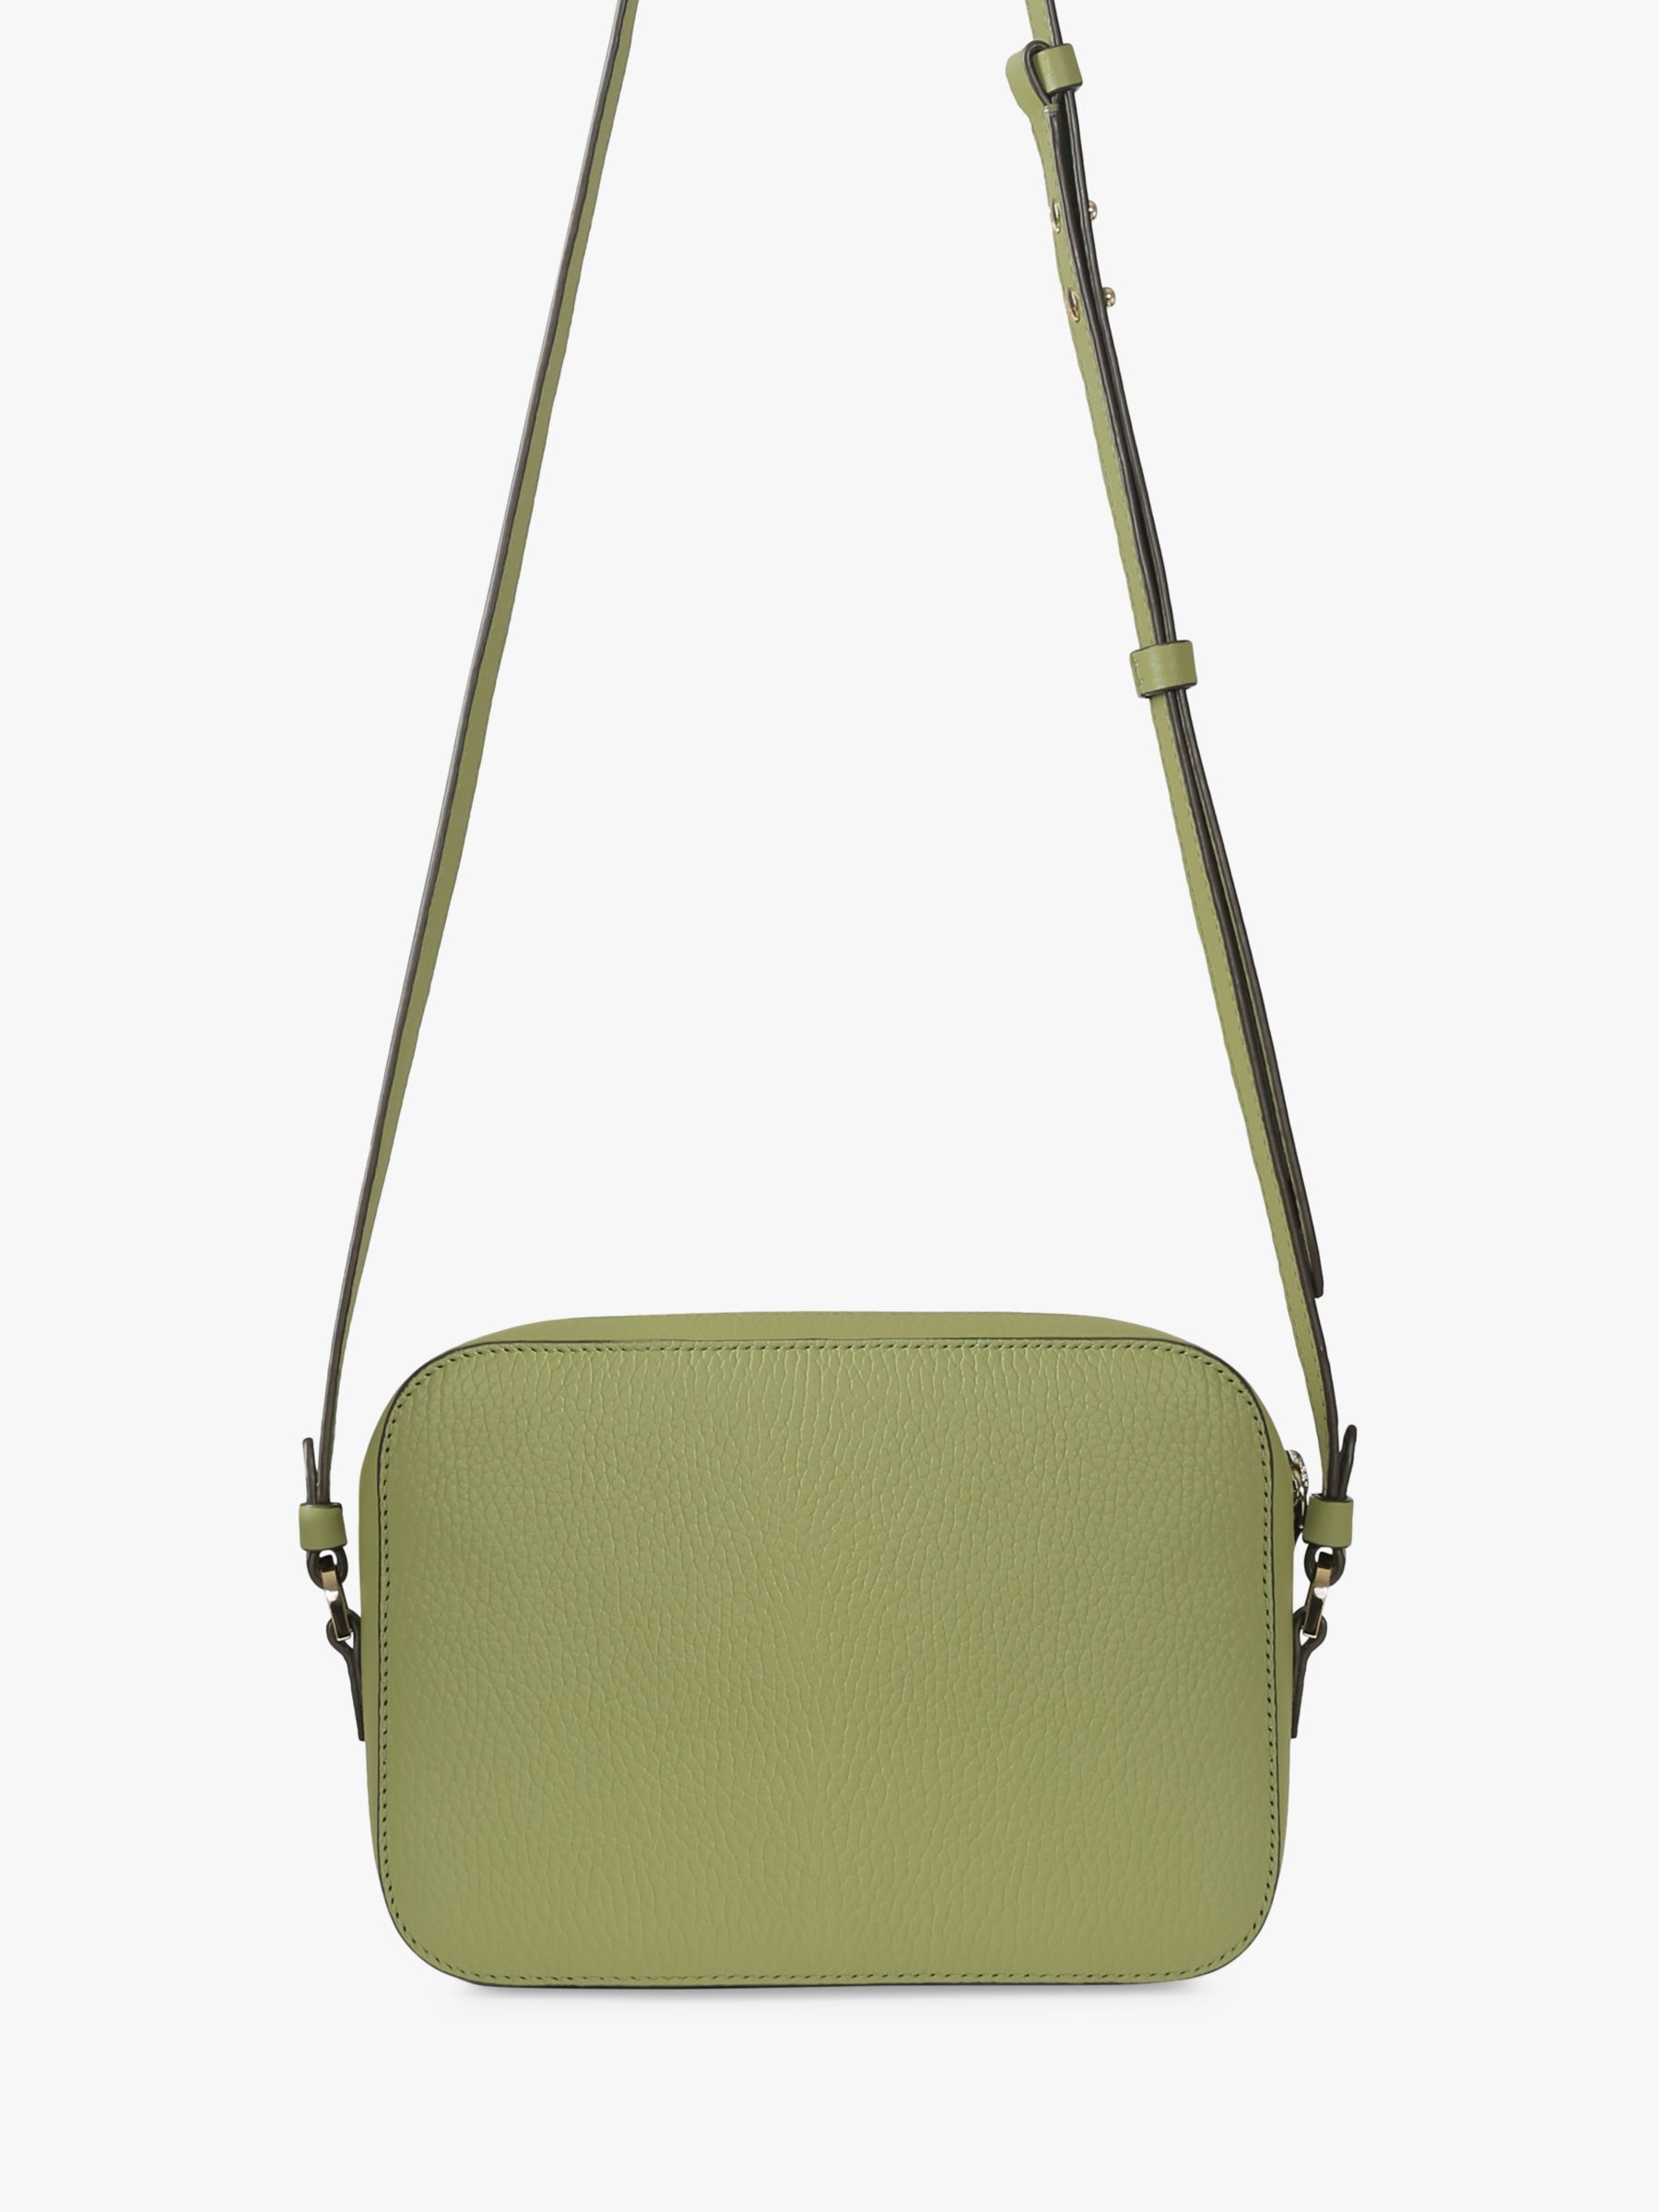 Strathberry Mosaic Leather Camera Bag, Olive at John Lewis & Partners